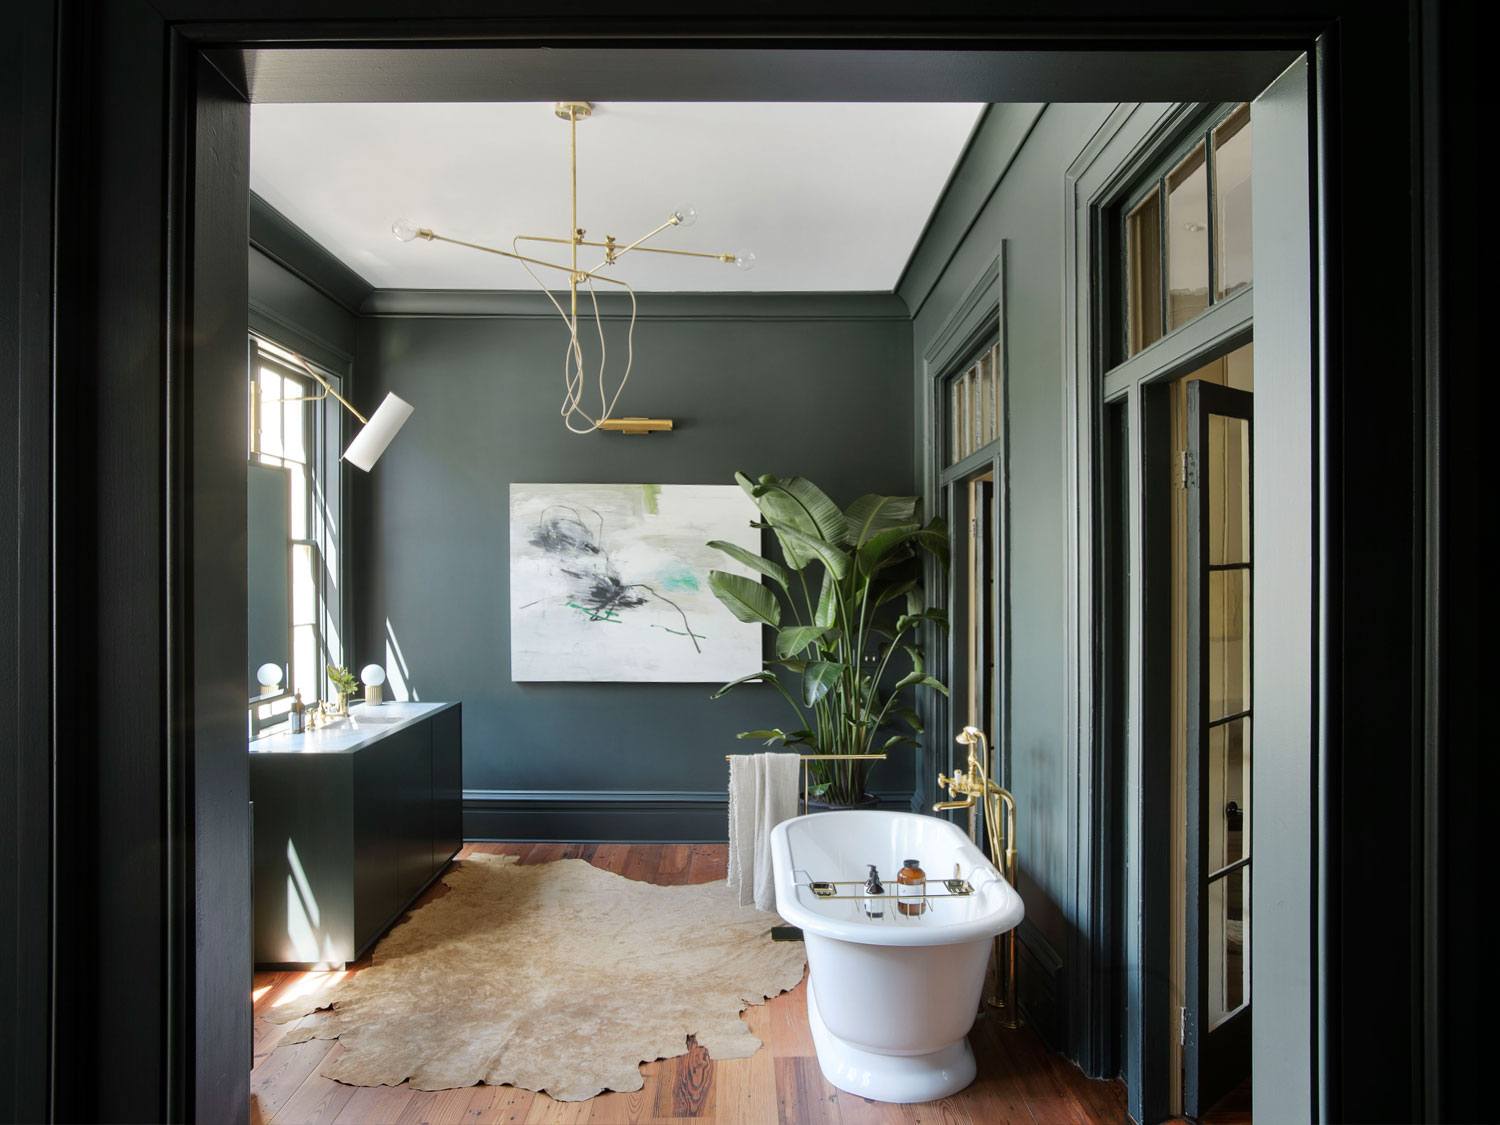 Workstead Redesigns A Historic Charleston Home